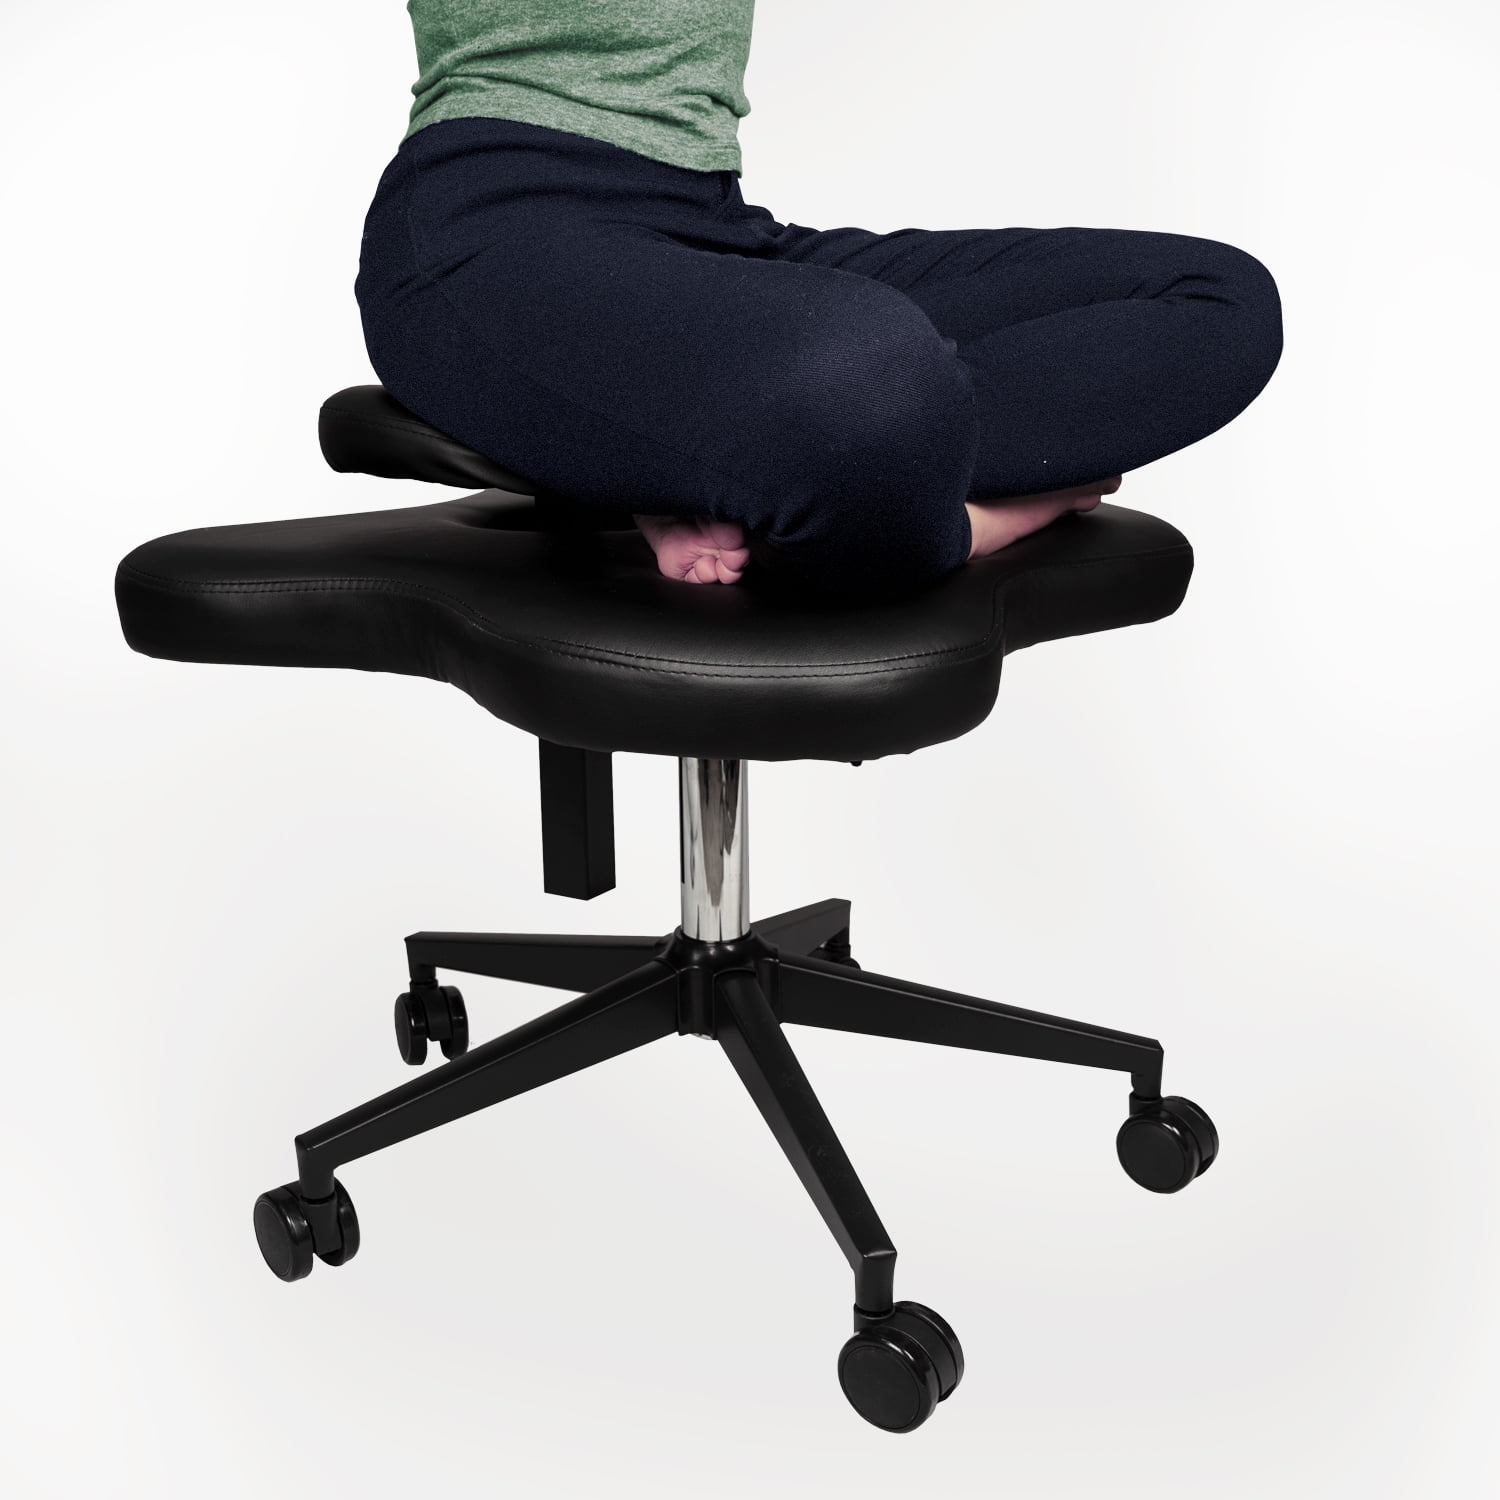 Cross Legged Kneeing Chair For Yoga Lovers Fitness Fanatics And Back Or Leg Pains Black